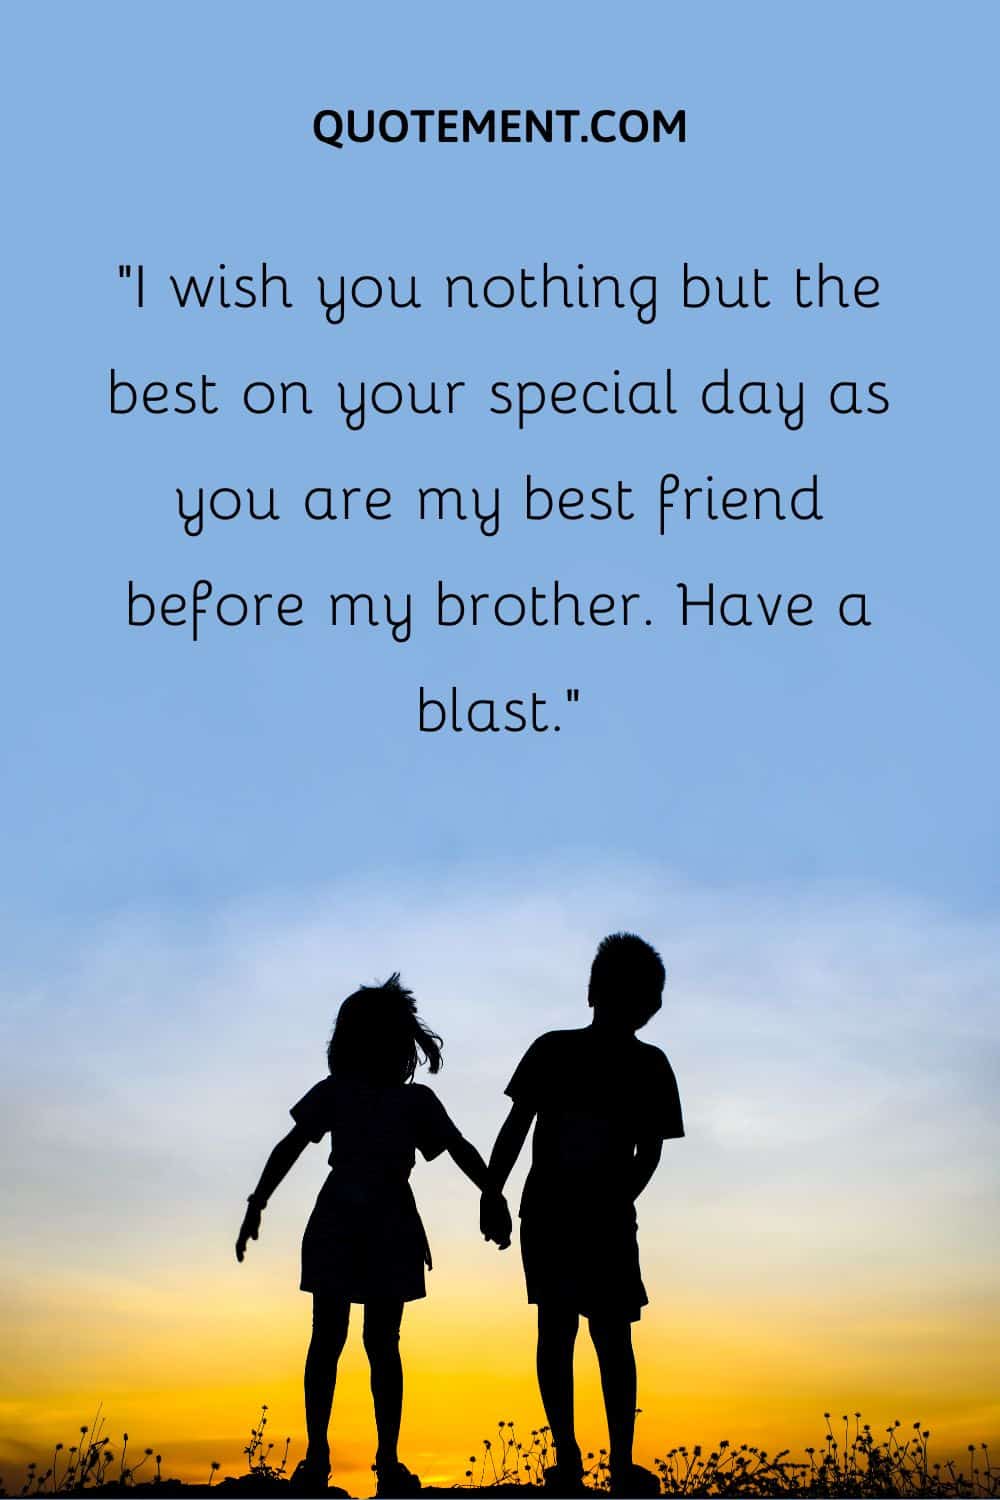 “I wish you nothing but the best on your special day as you are my best friend before my brother. Have a blast.”